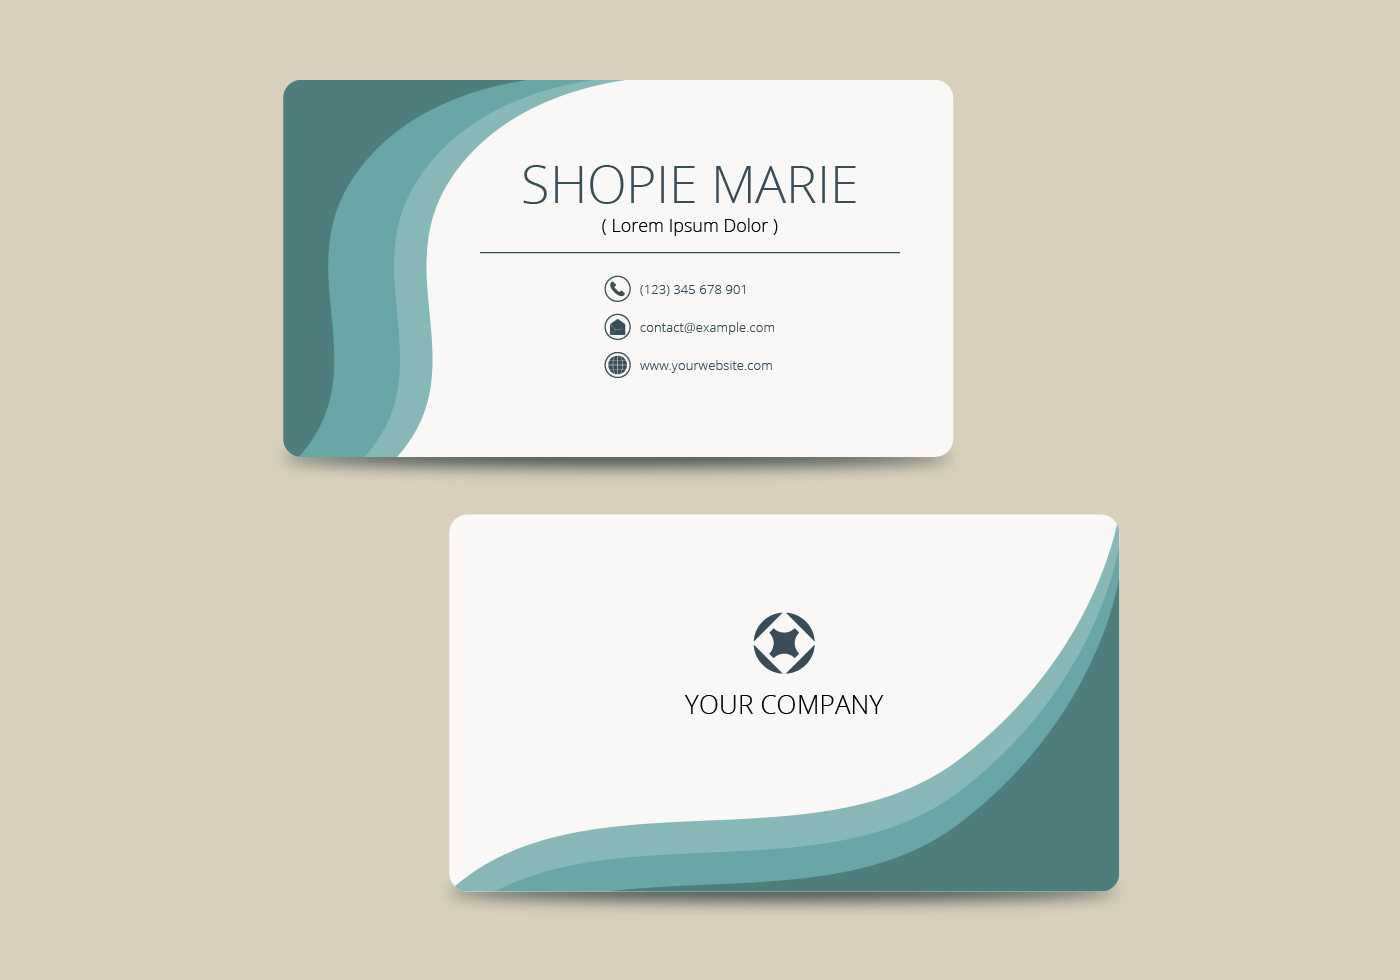 Teal Business Card Template Vector – Download Free Vectors In Call Card Templates